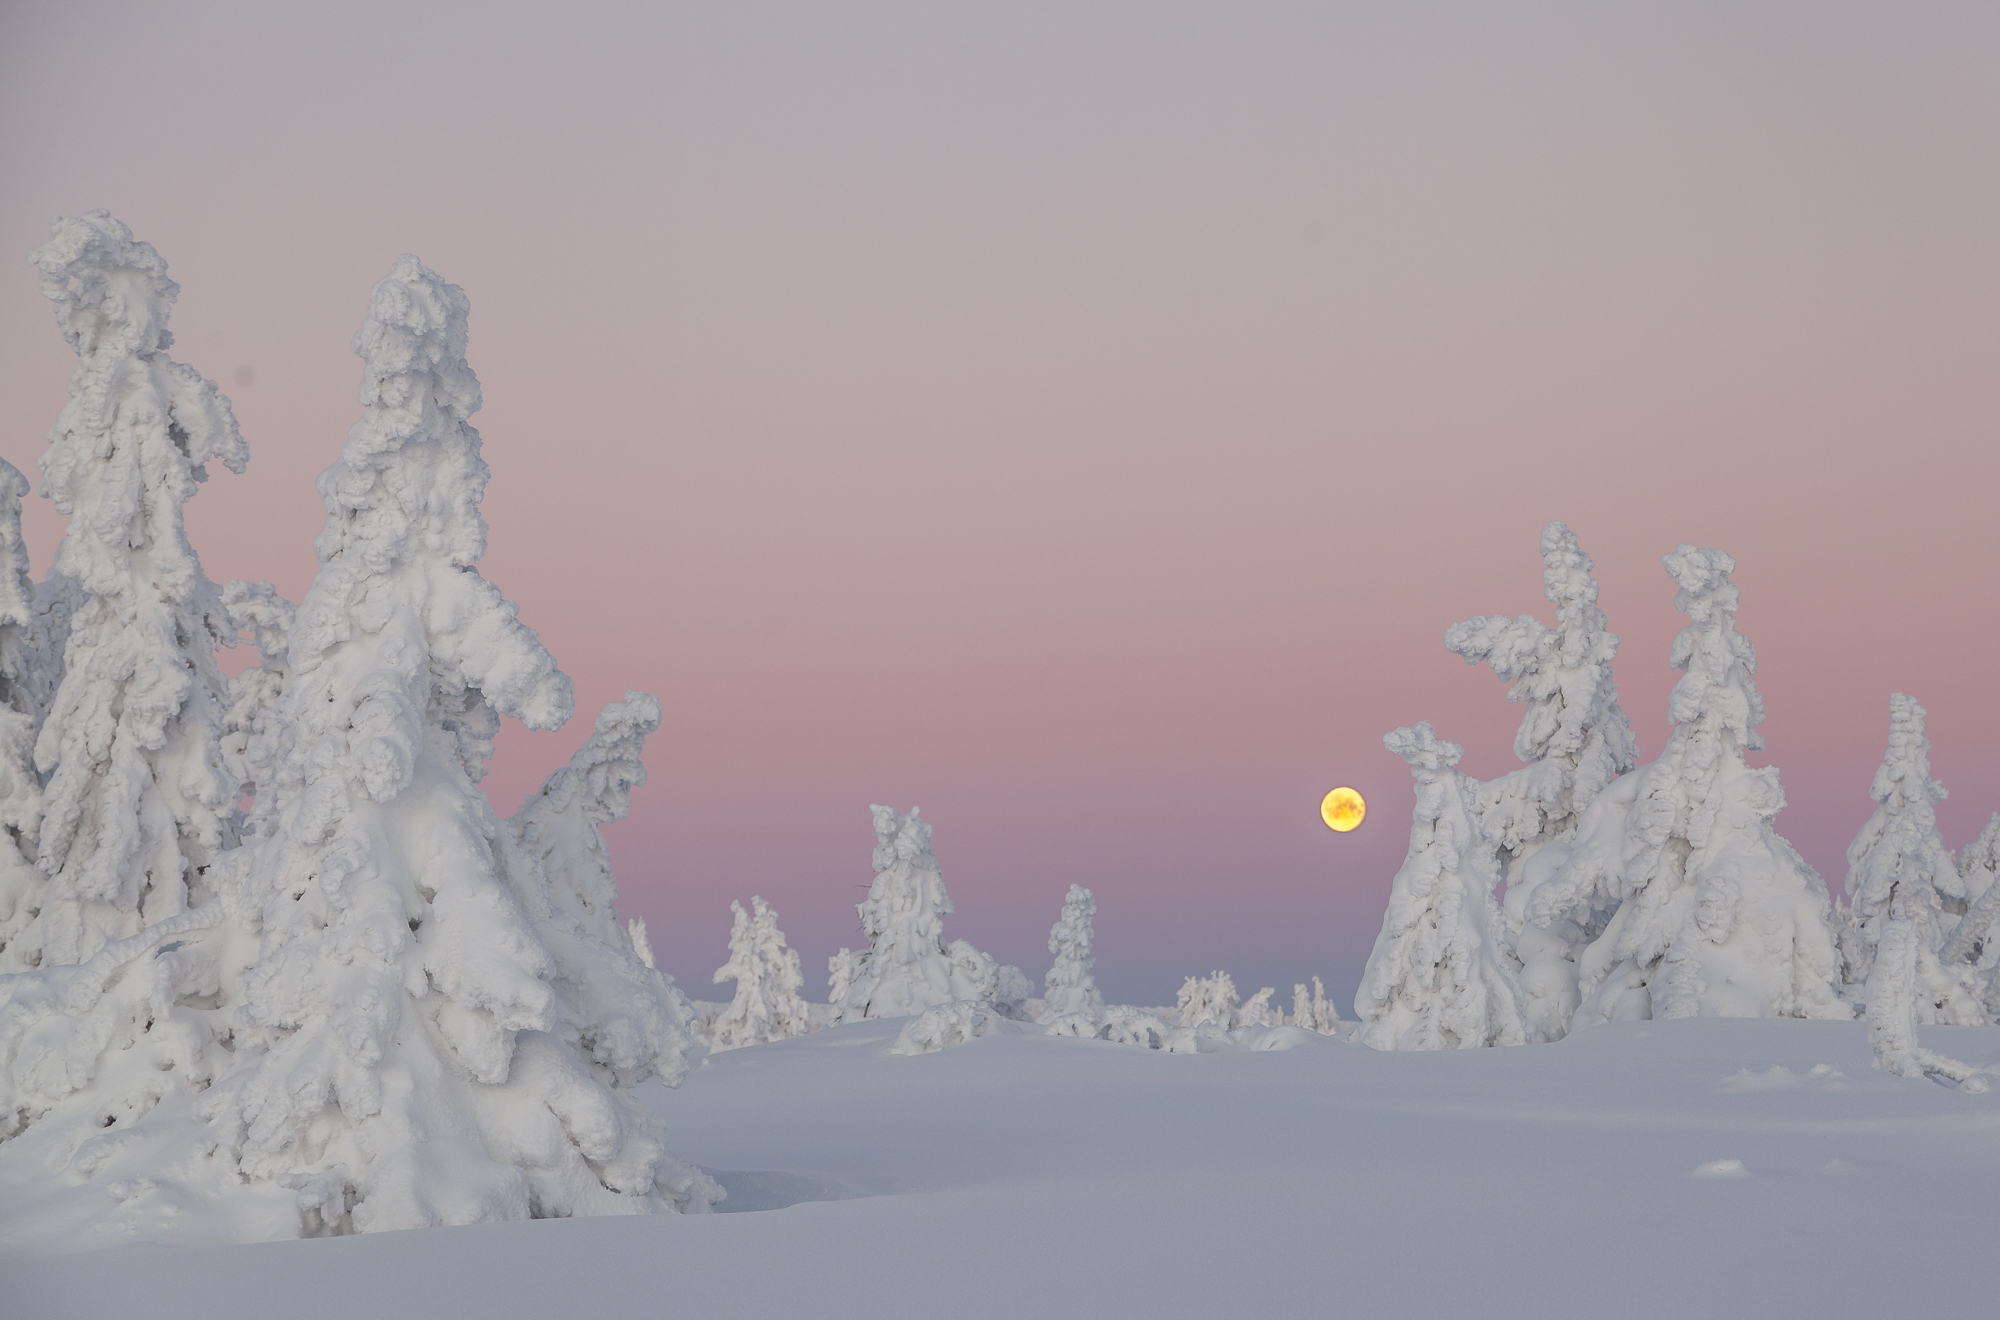 Full moon at winter morning from Norway Telemark Blefjell